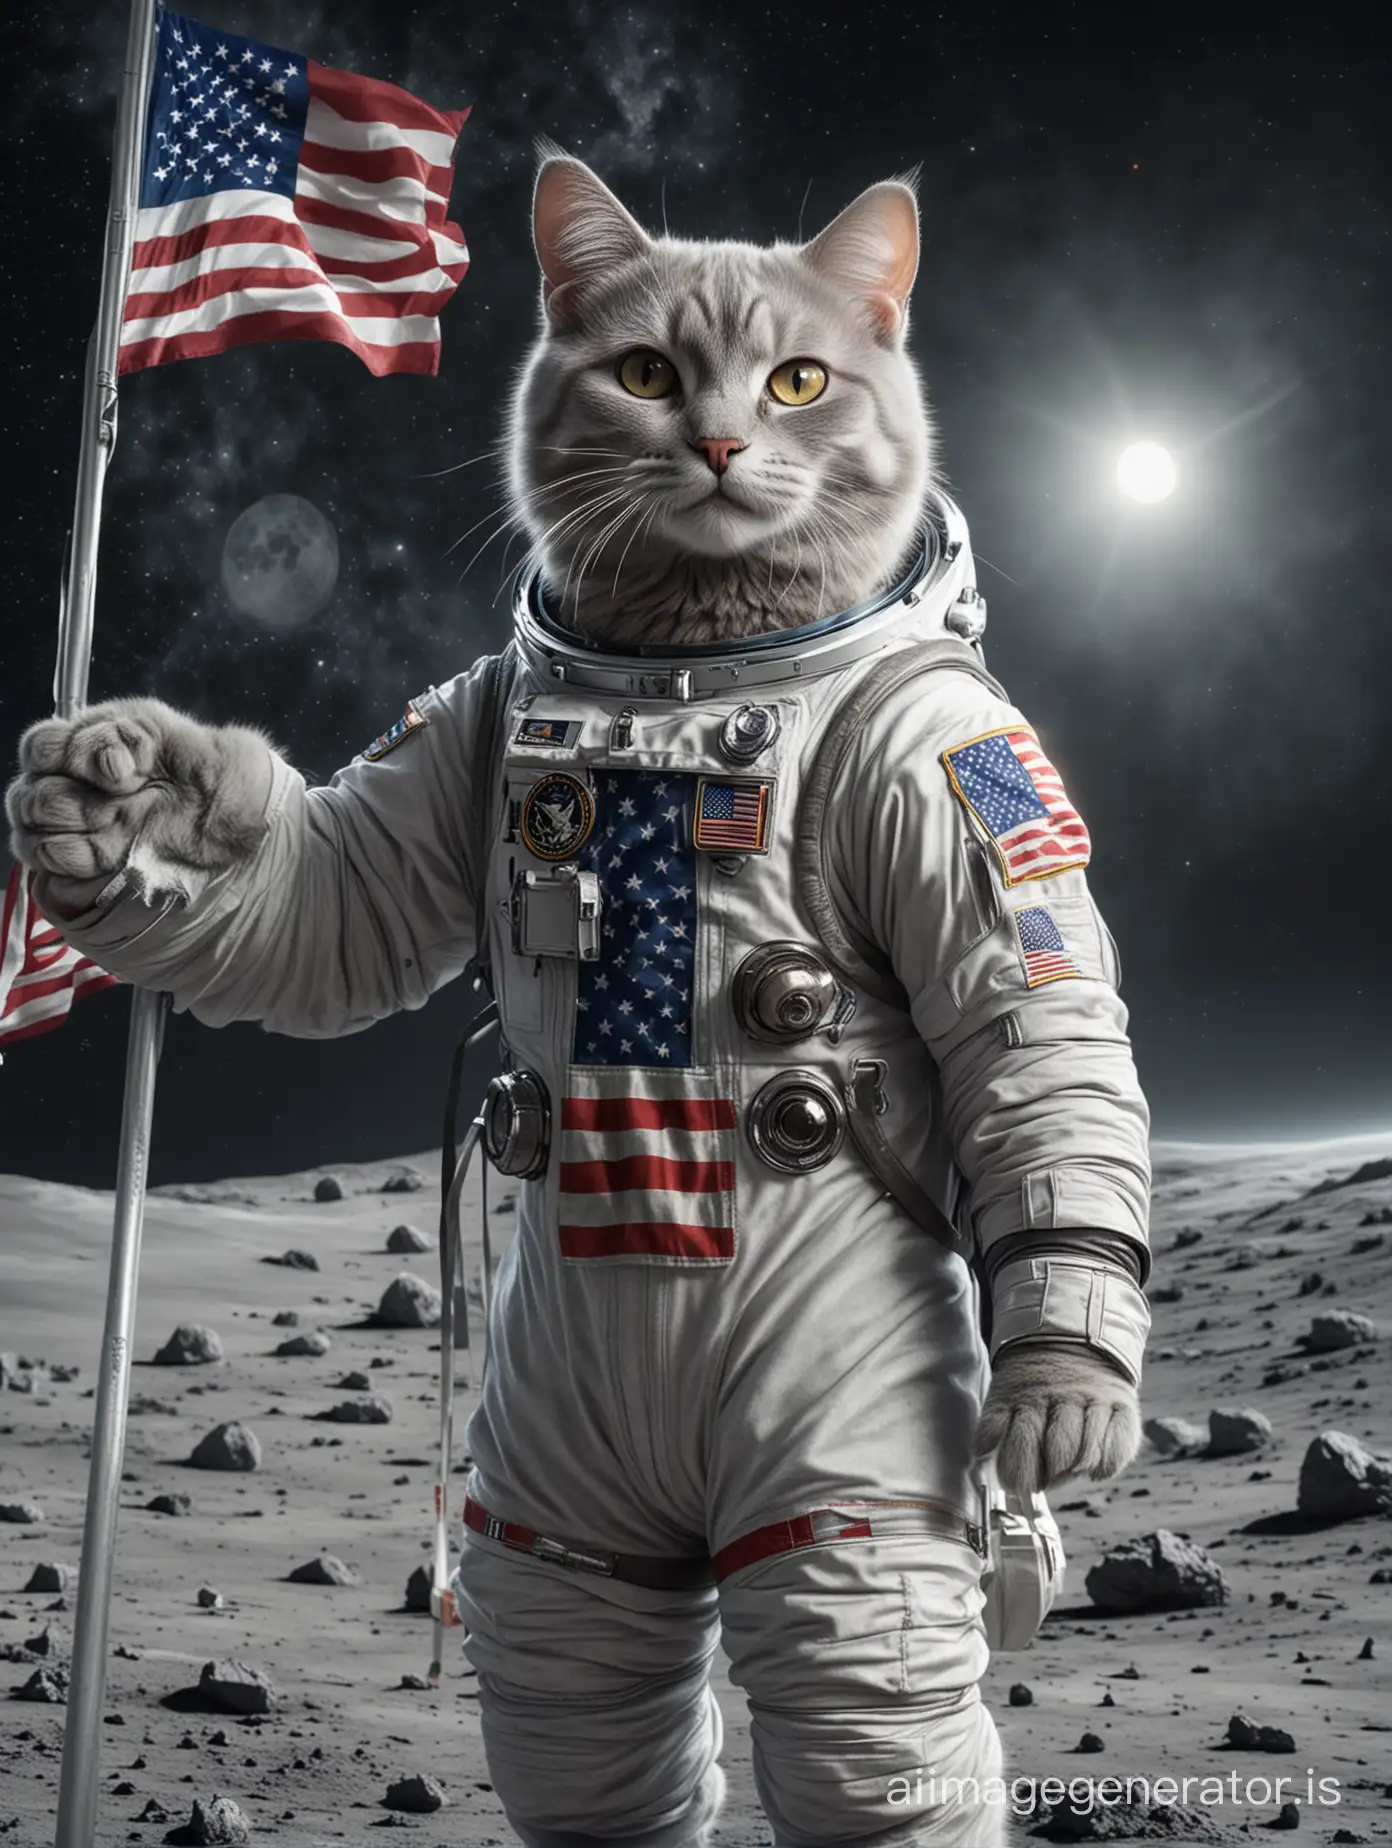 Realistic-Neill-Armstrong-Style-Cat-in-Spacesuit-Raising-American-Flag-on-Moon-Ground